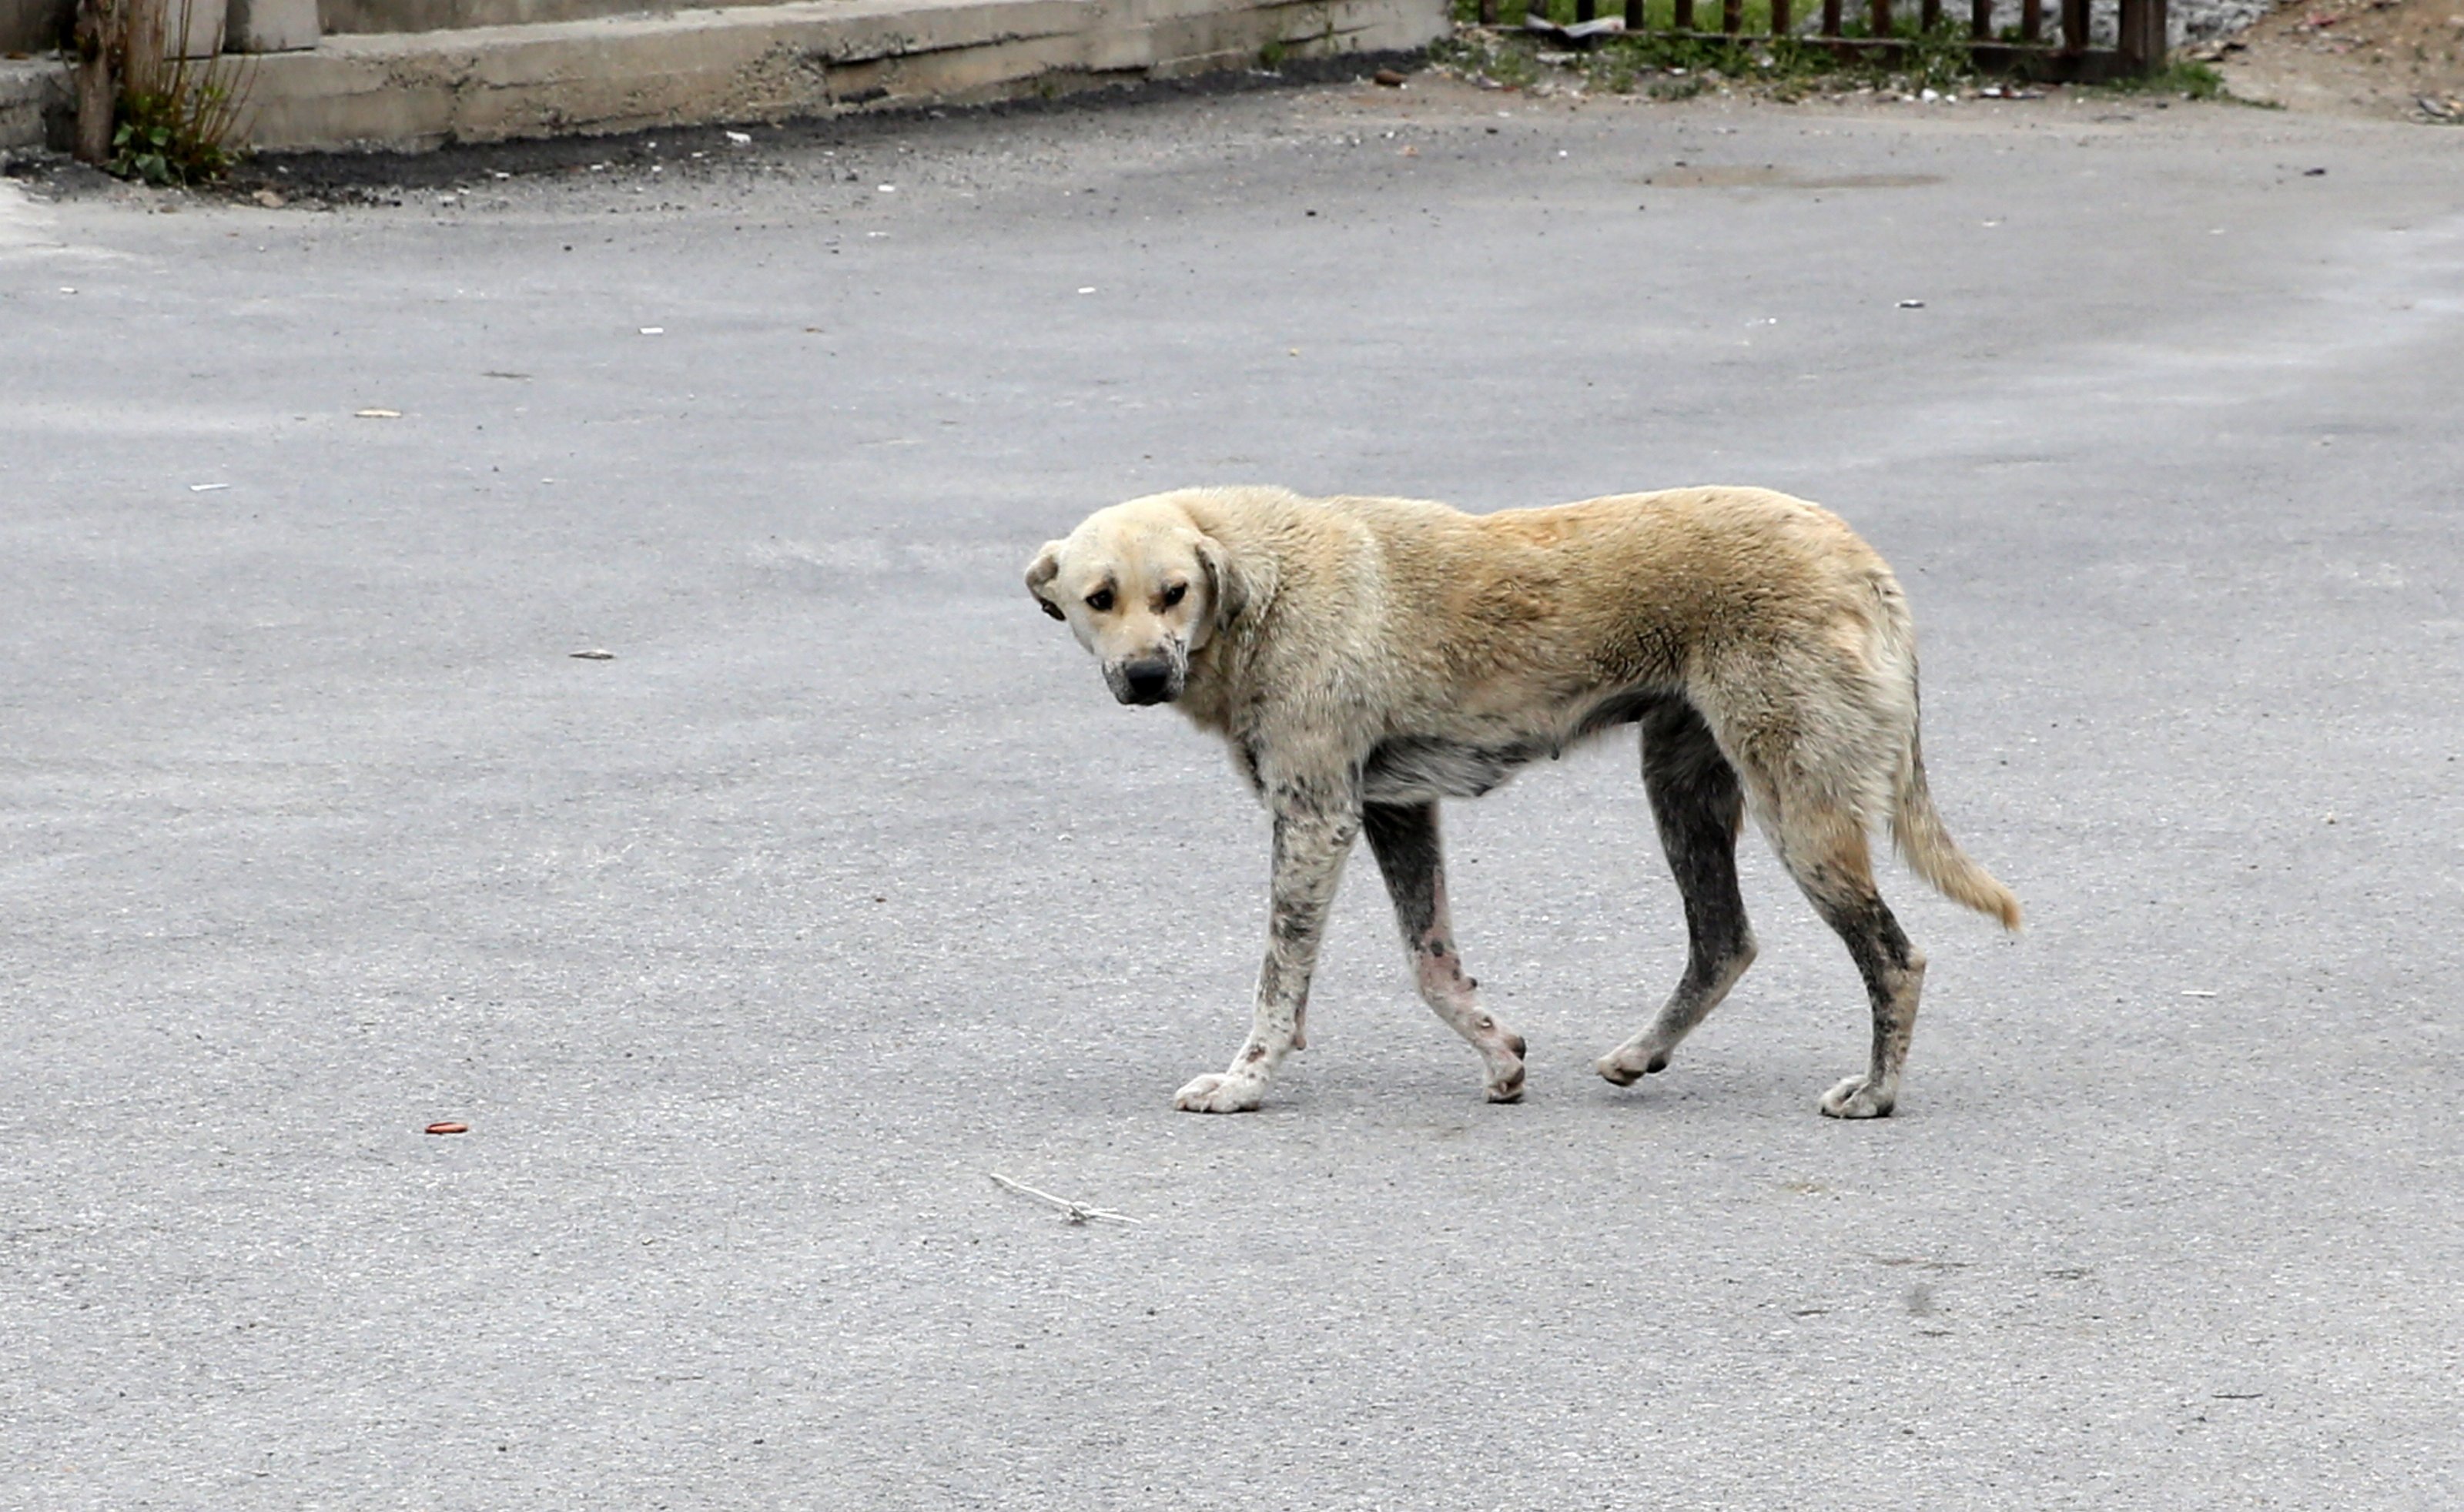 Türkiye to release a bill allowing euthanasia for stray dogs if not adopted. (AA Photo)